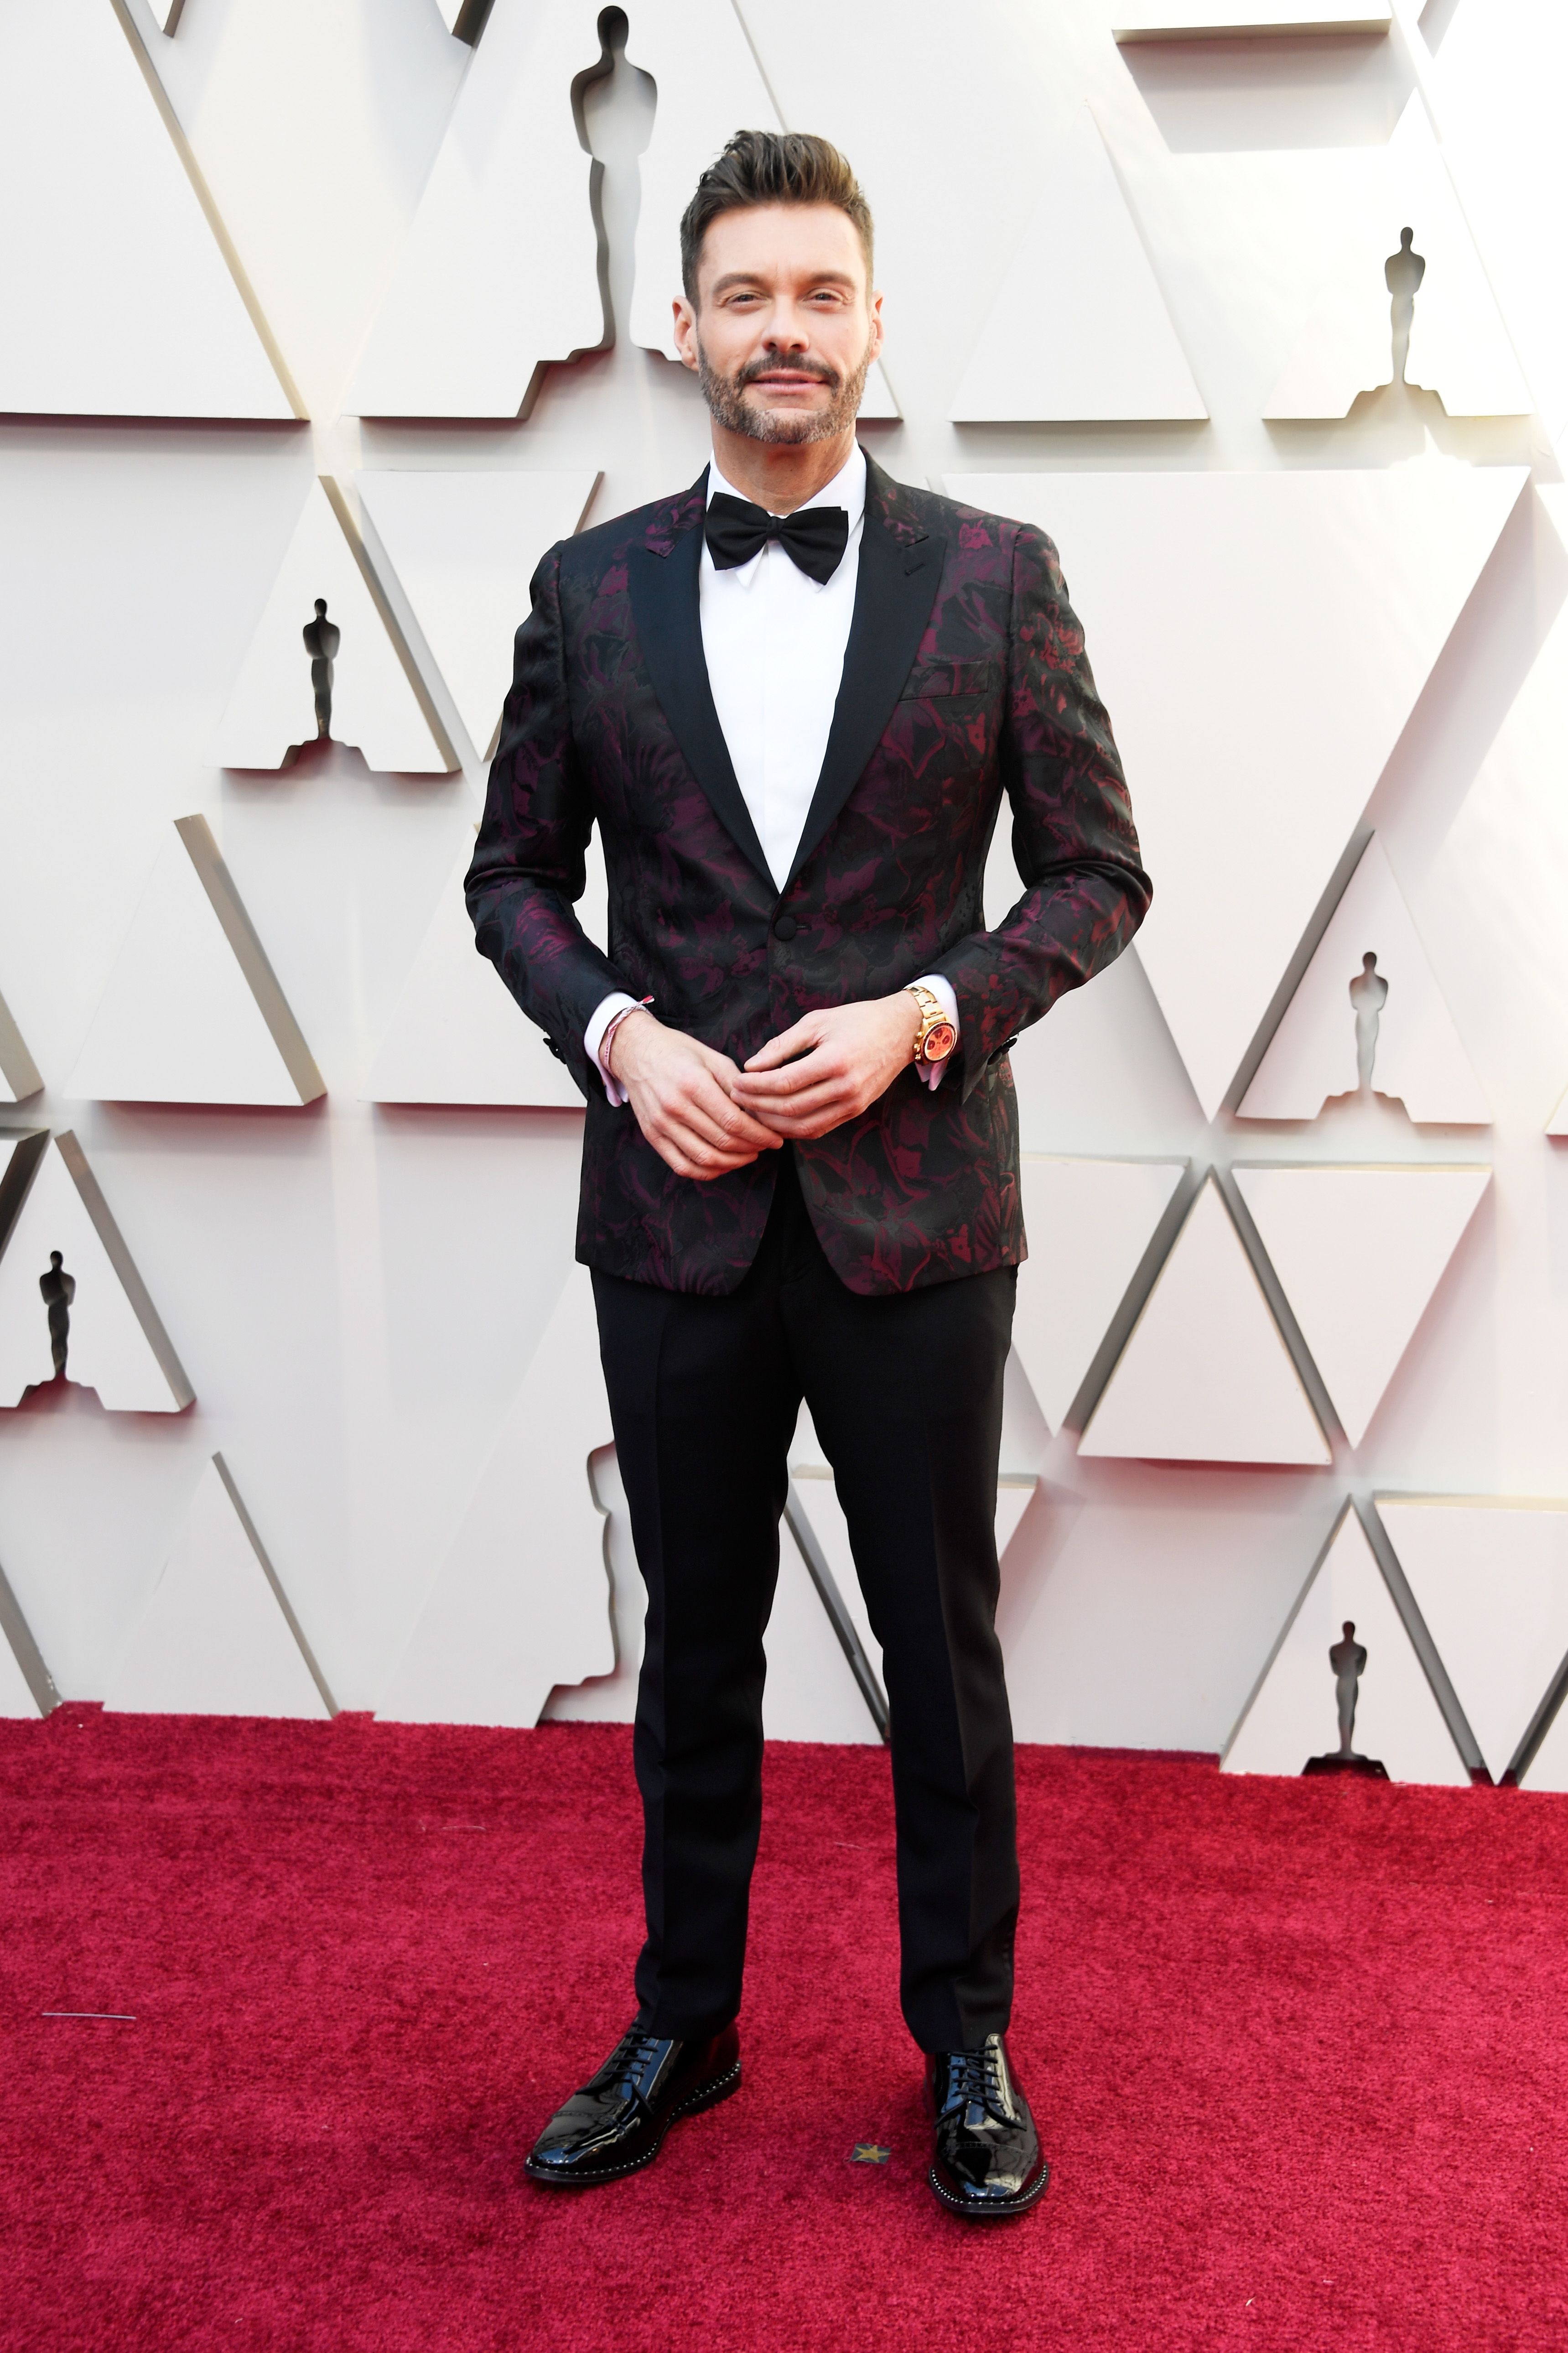 Ryan Seacrest during the 91st Annual Academy Awards at Hollywood and Highland on February 24, 2019. | Source: Getty Images